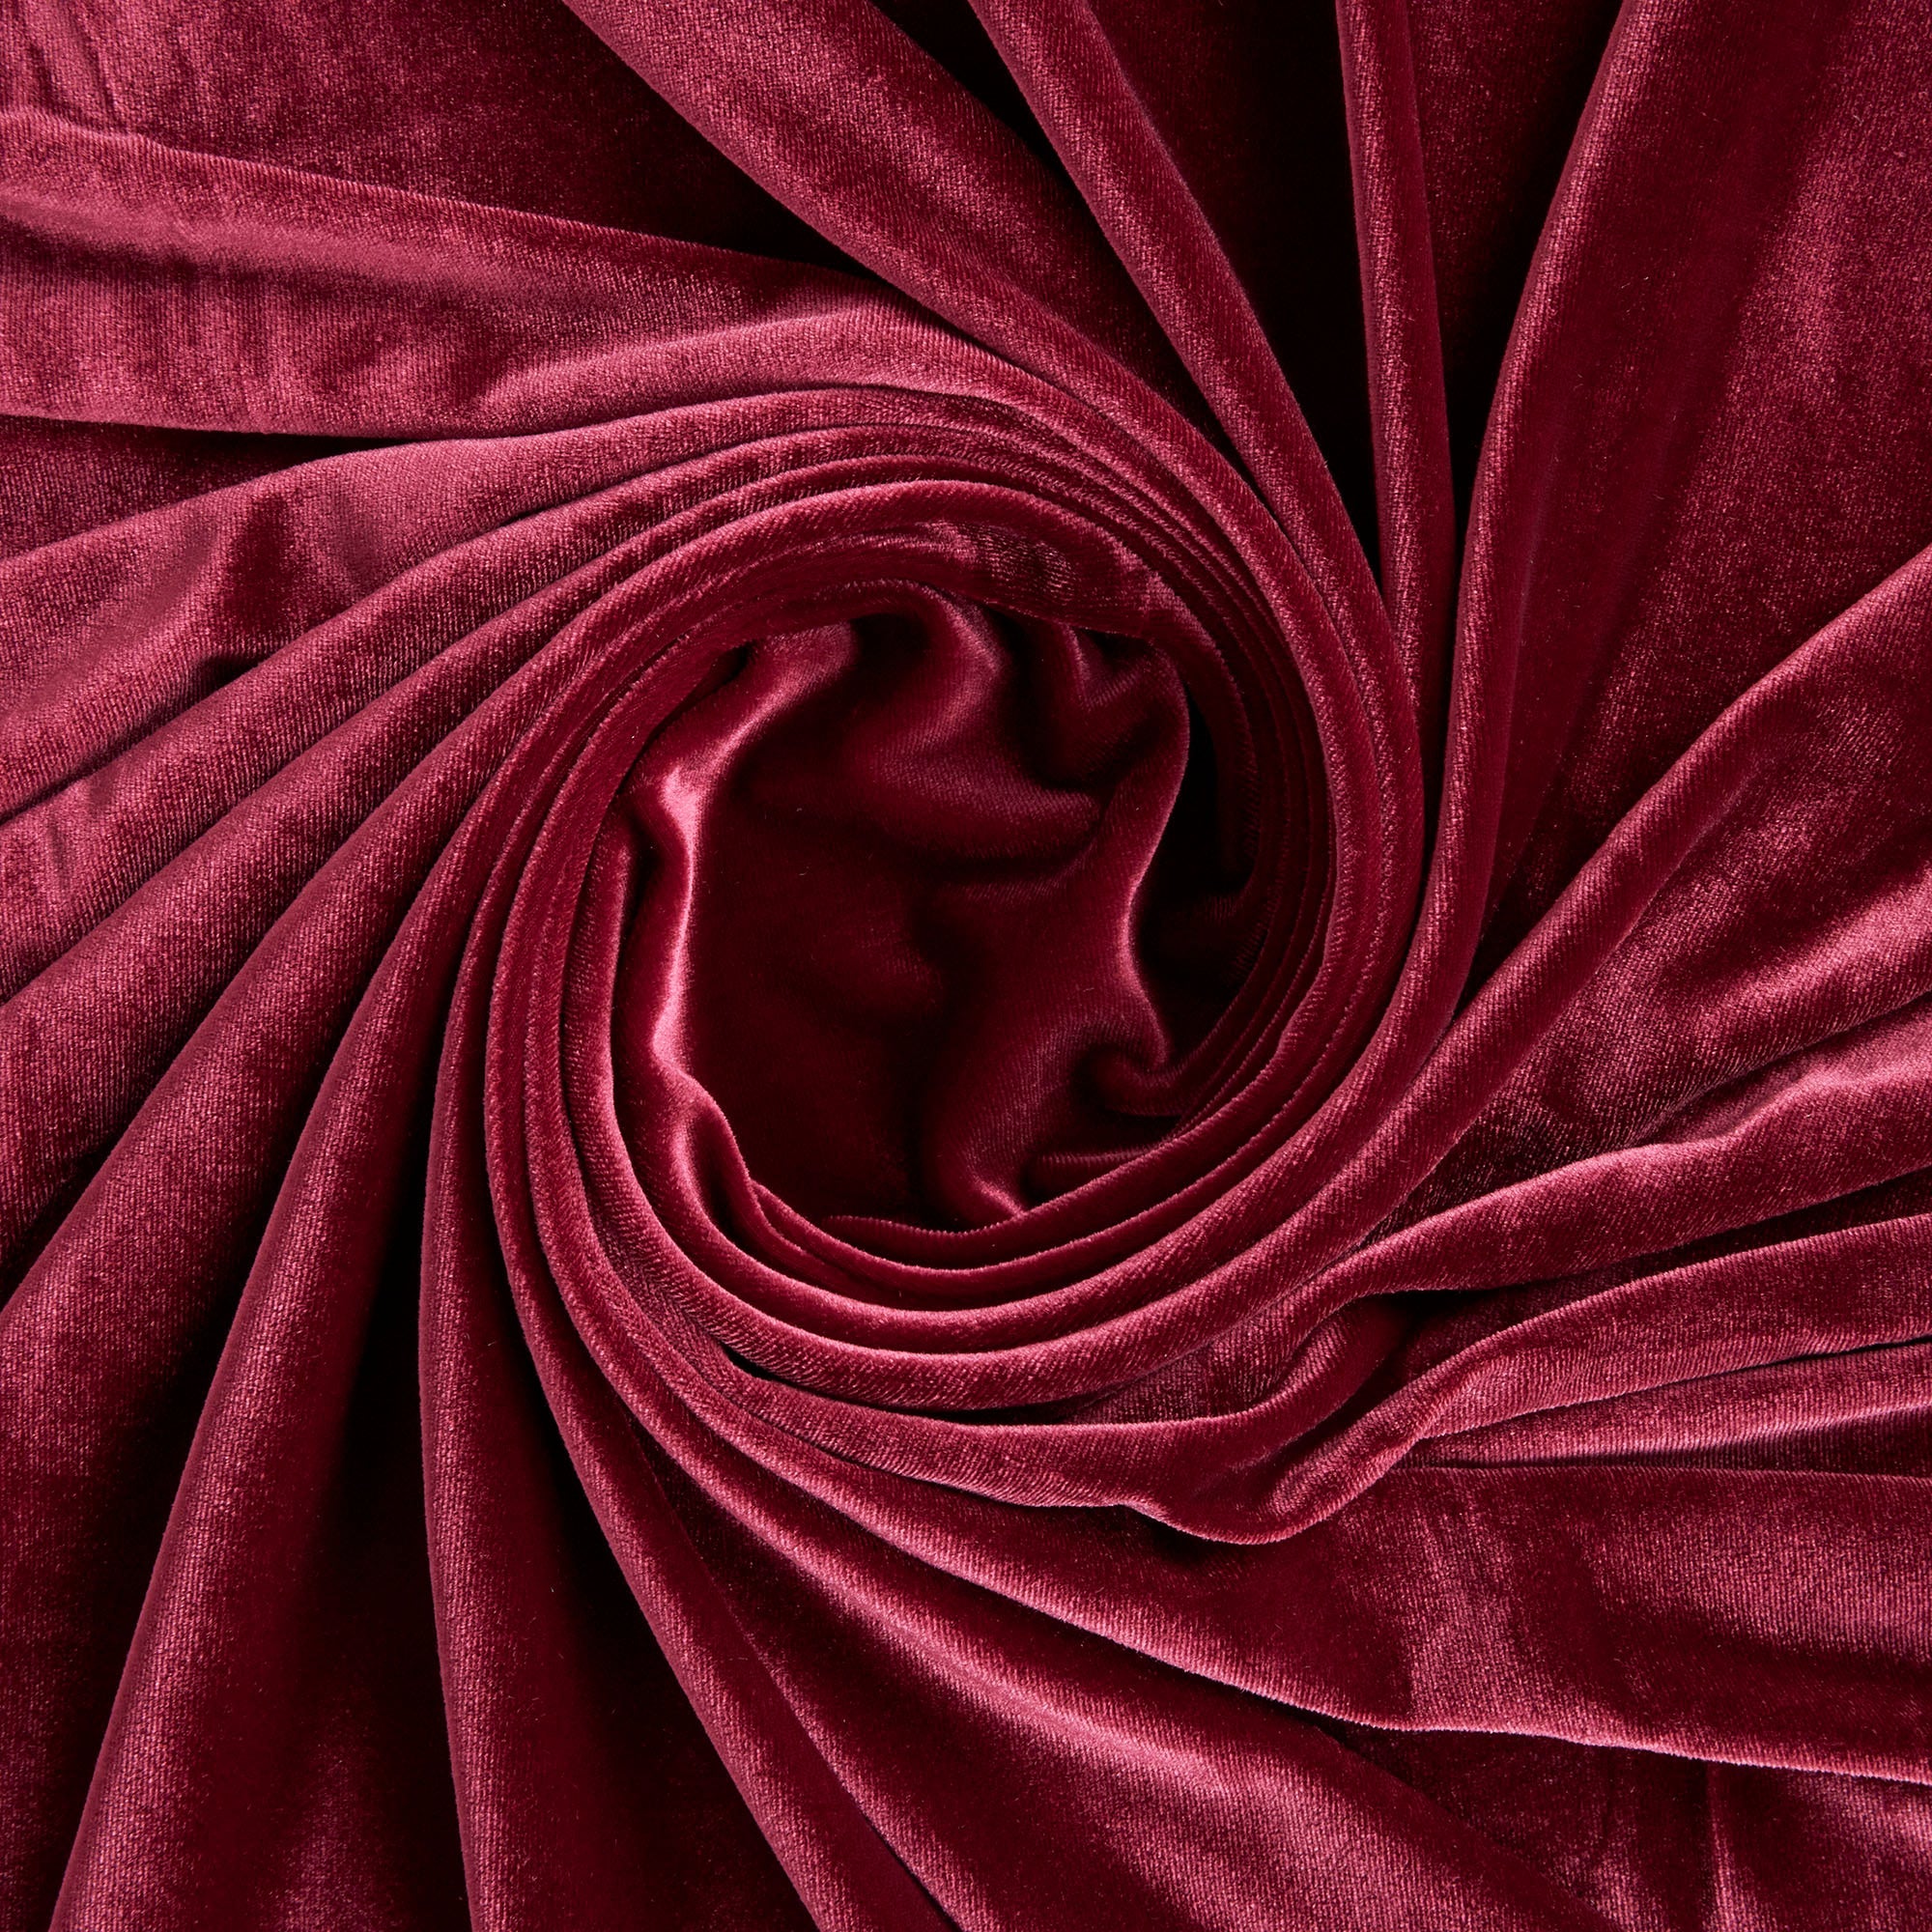 Solid Color Cherry Red Flocking Velvet Fabric Sold by the Yard for